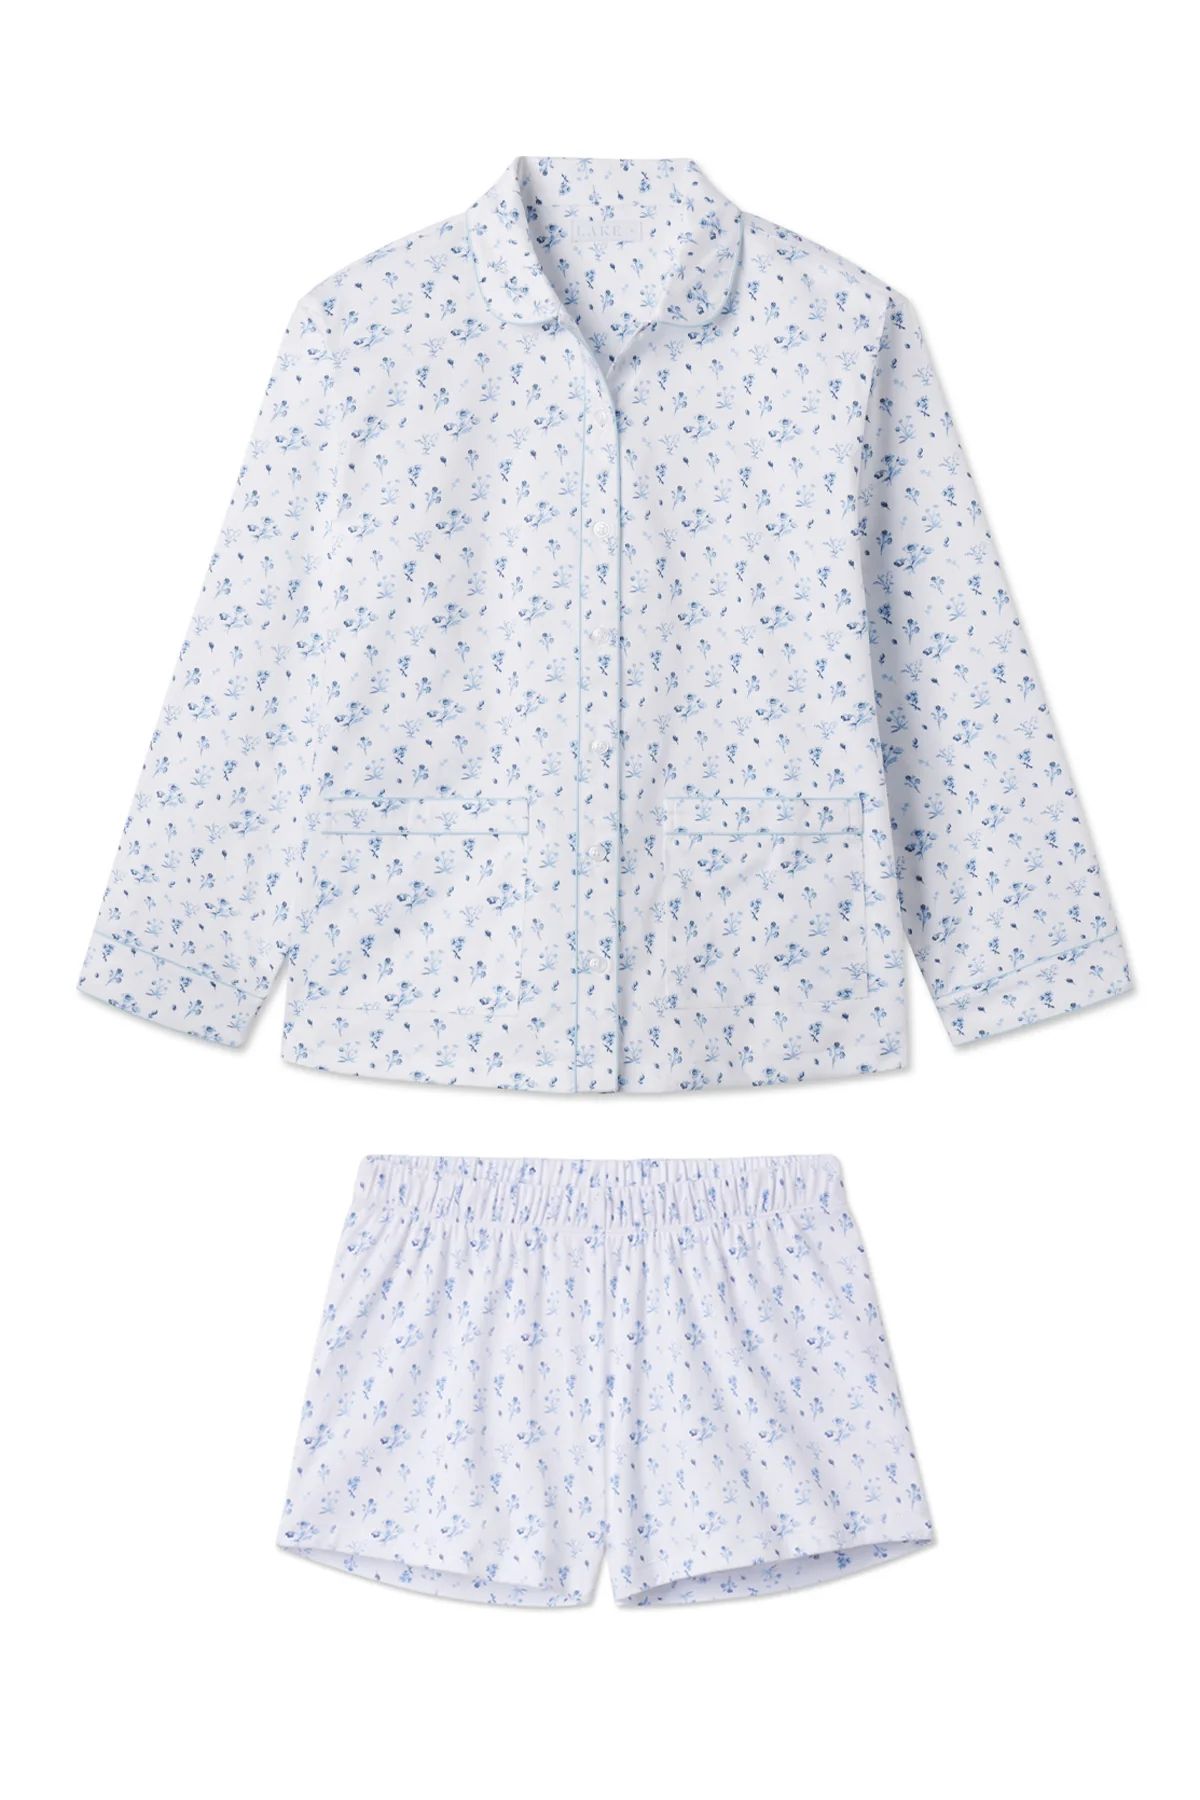 Poplin Piped Shorts Set in French Blue Floral | Lake Pajamas